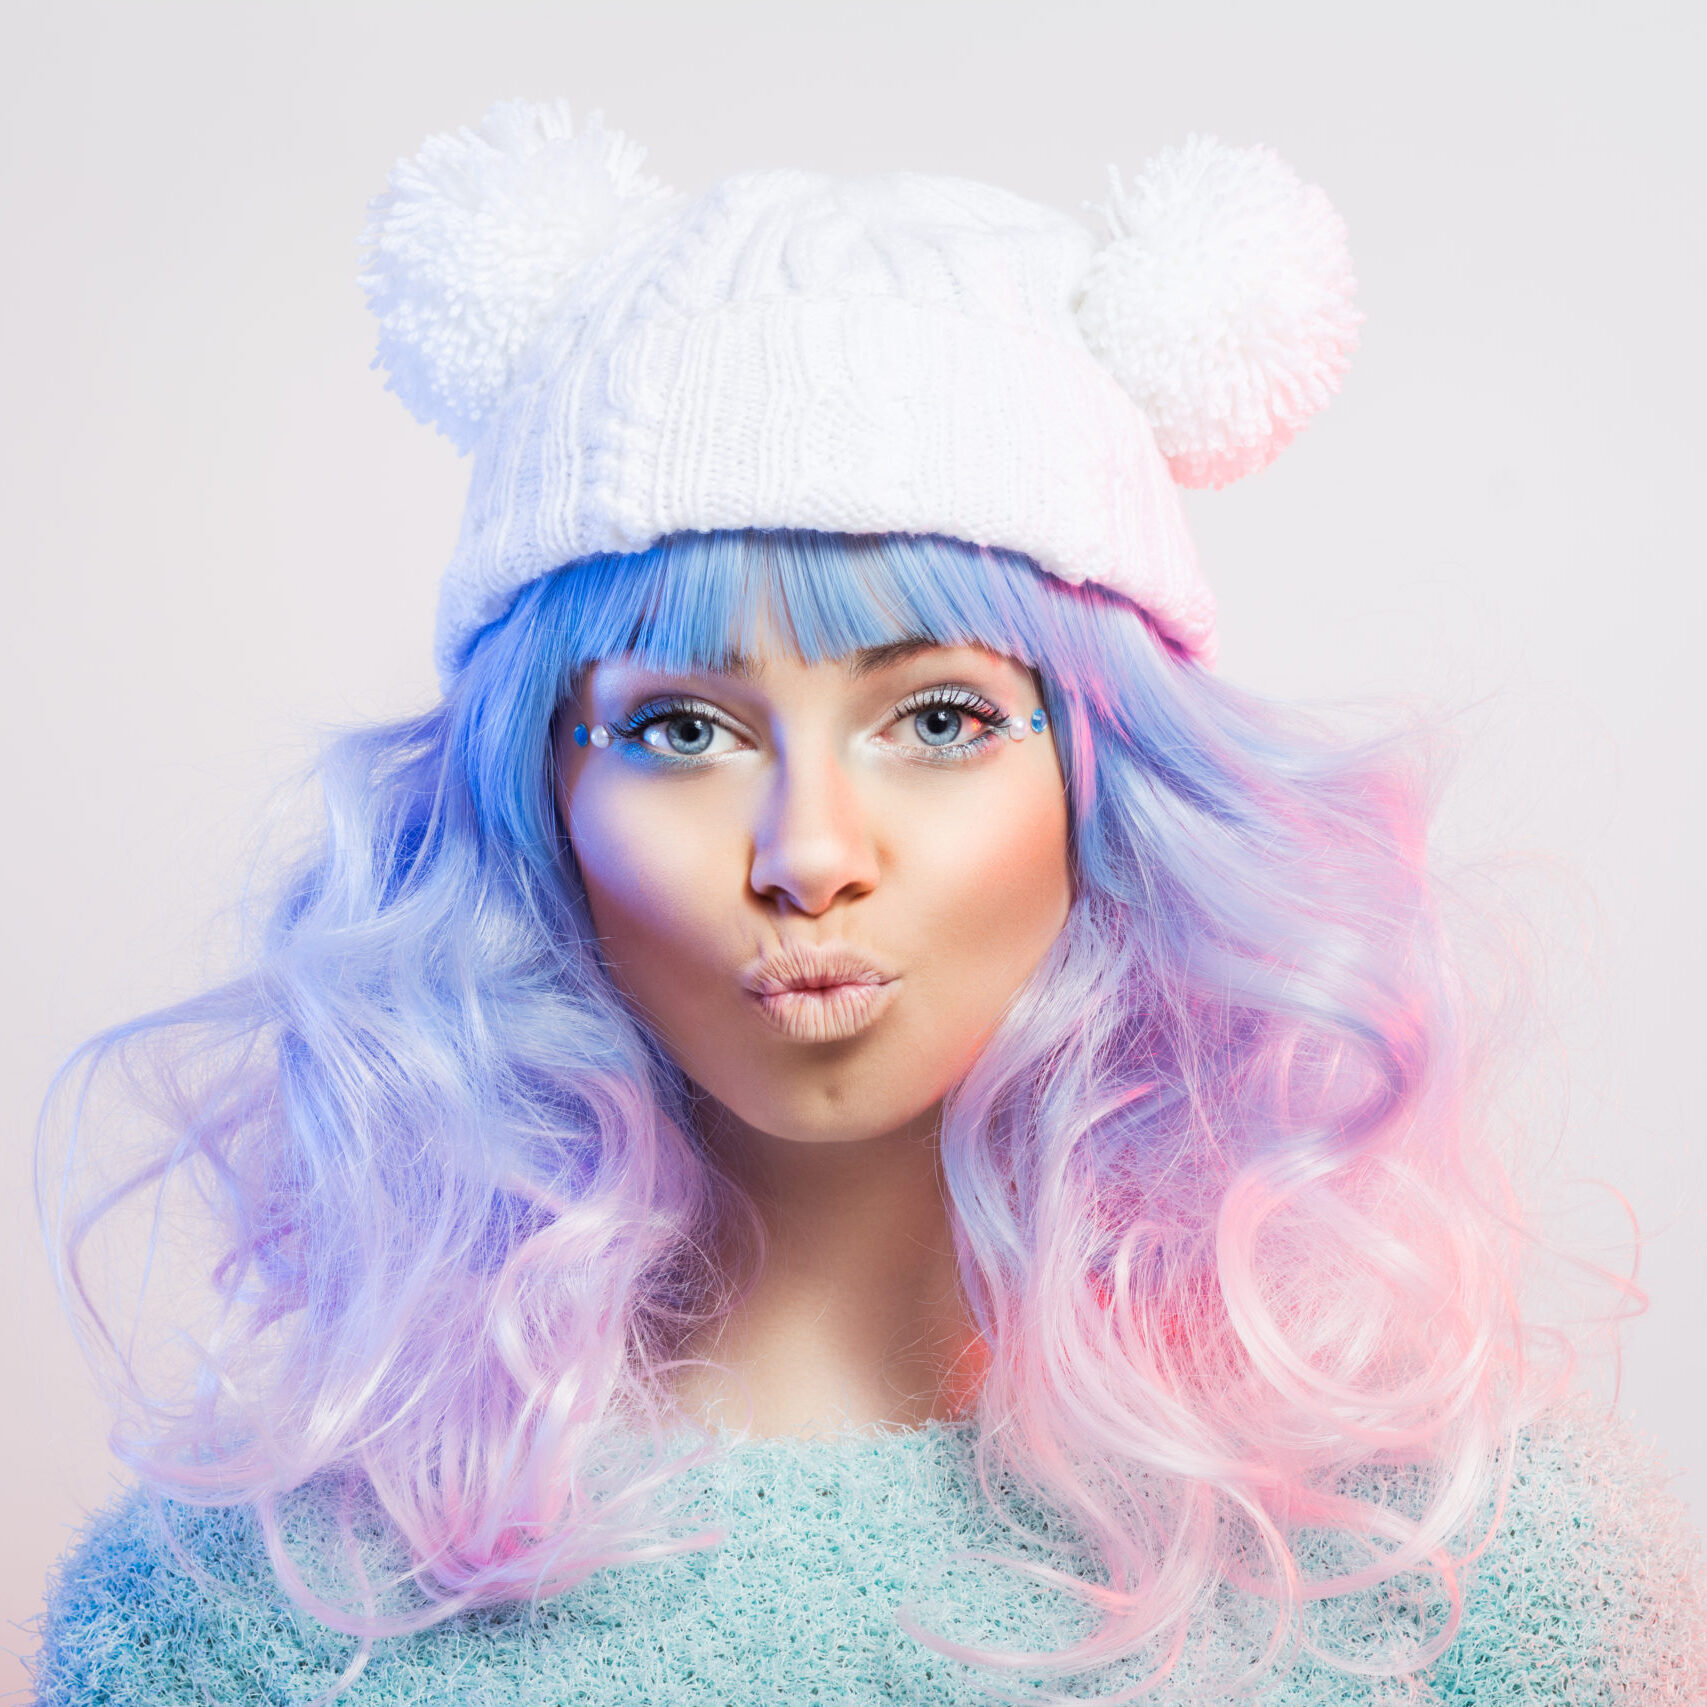 Cute young fashion woman with pastel purple and pink hair and makeup